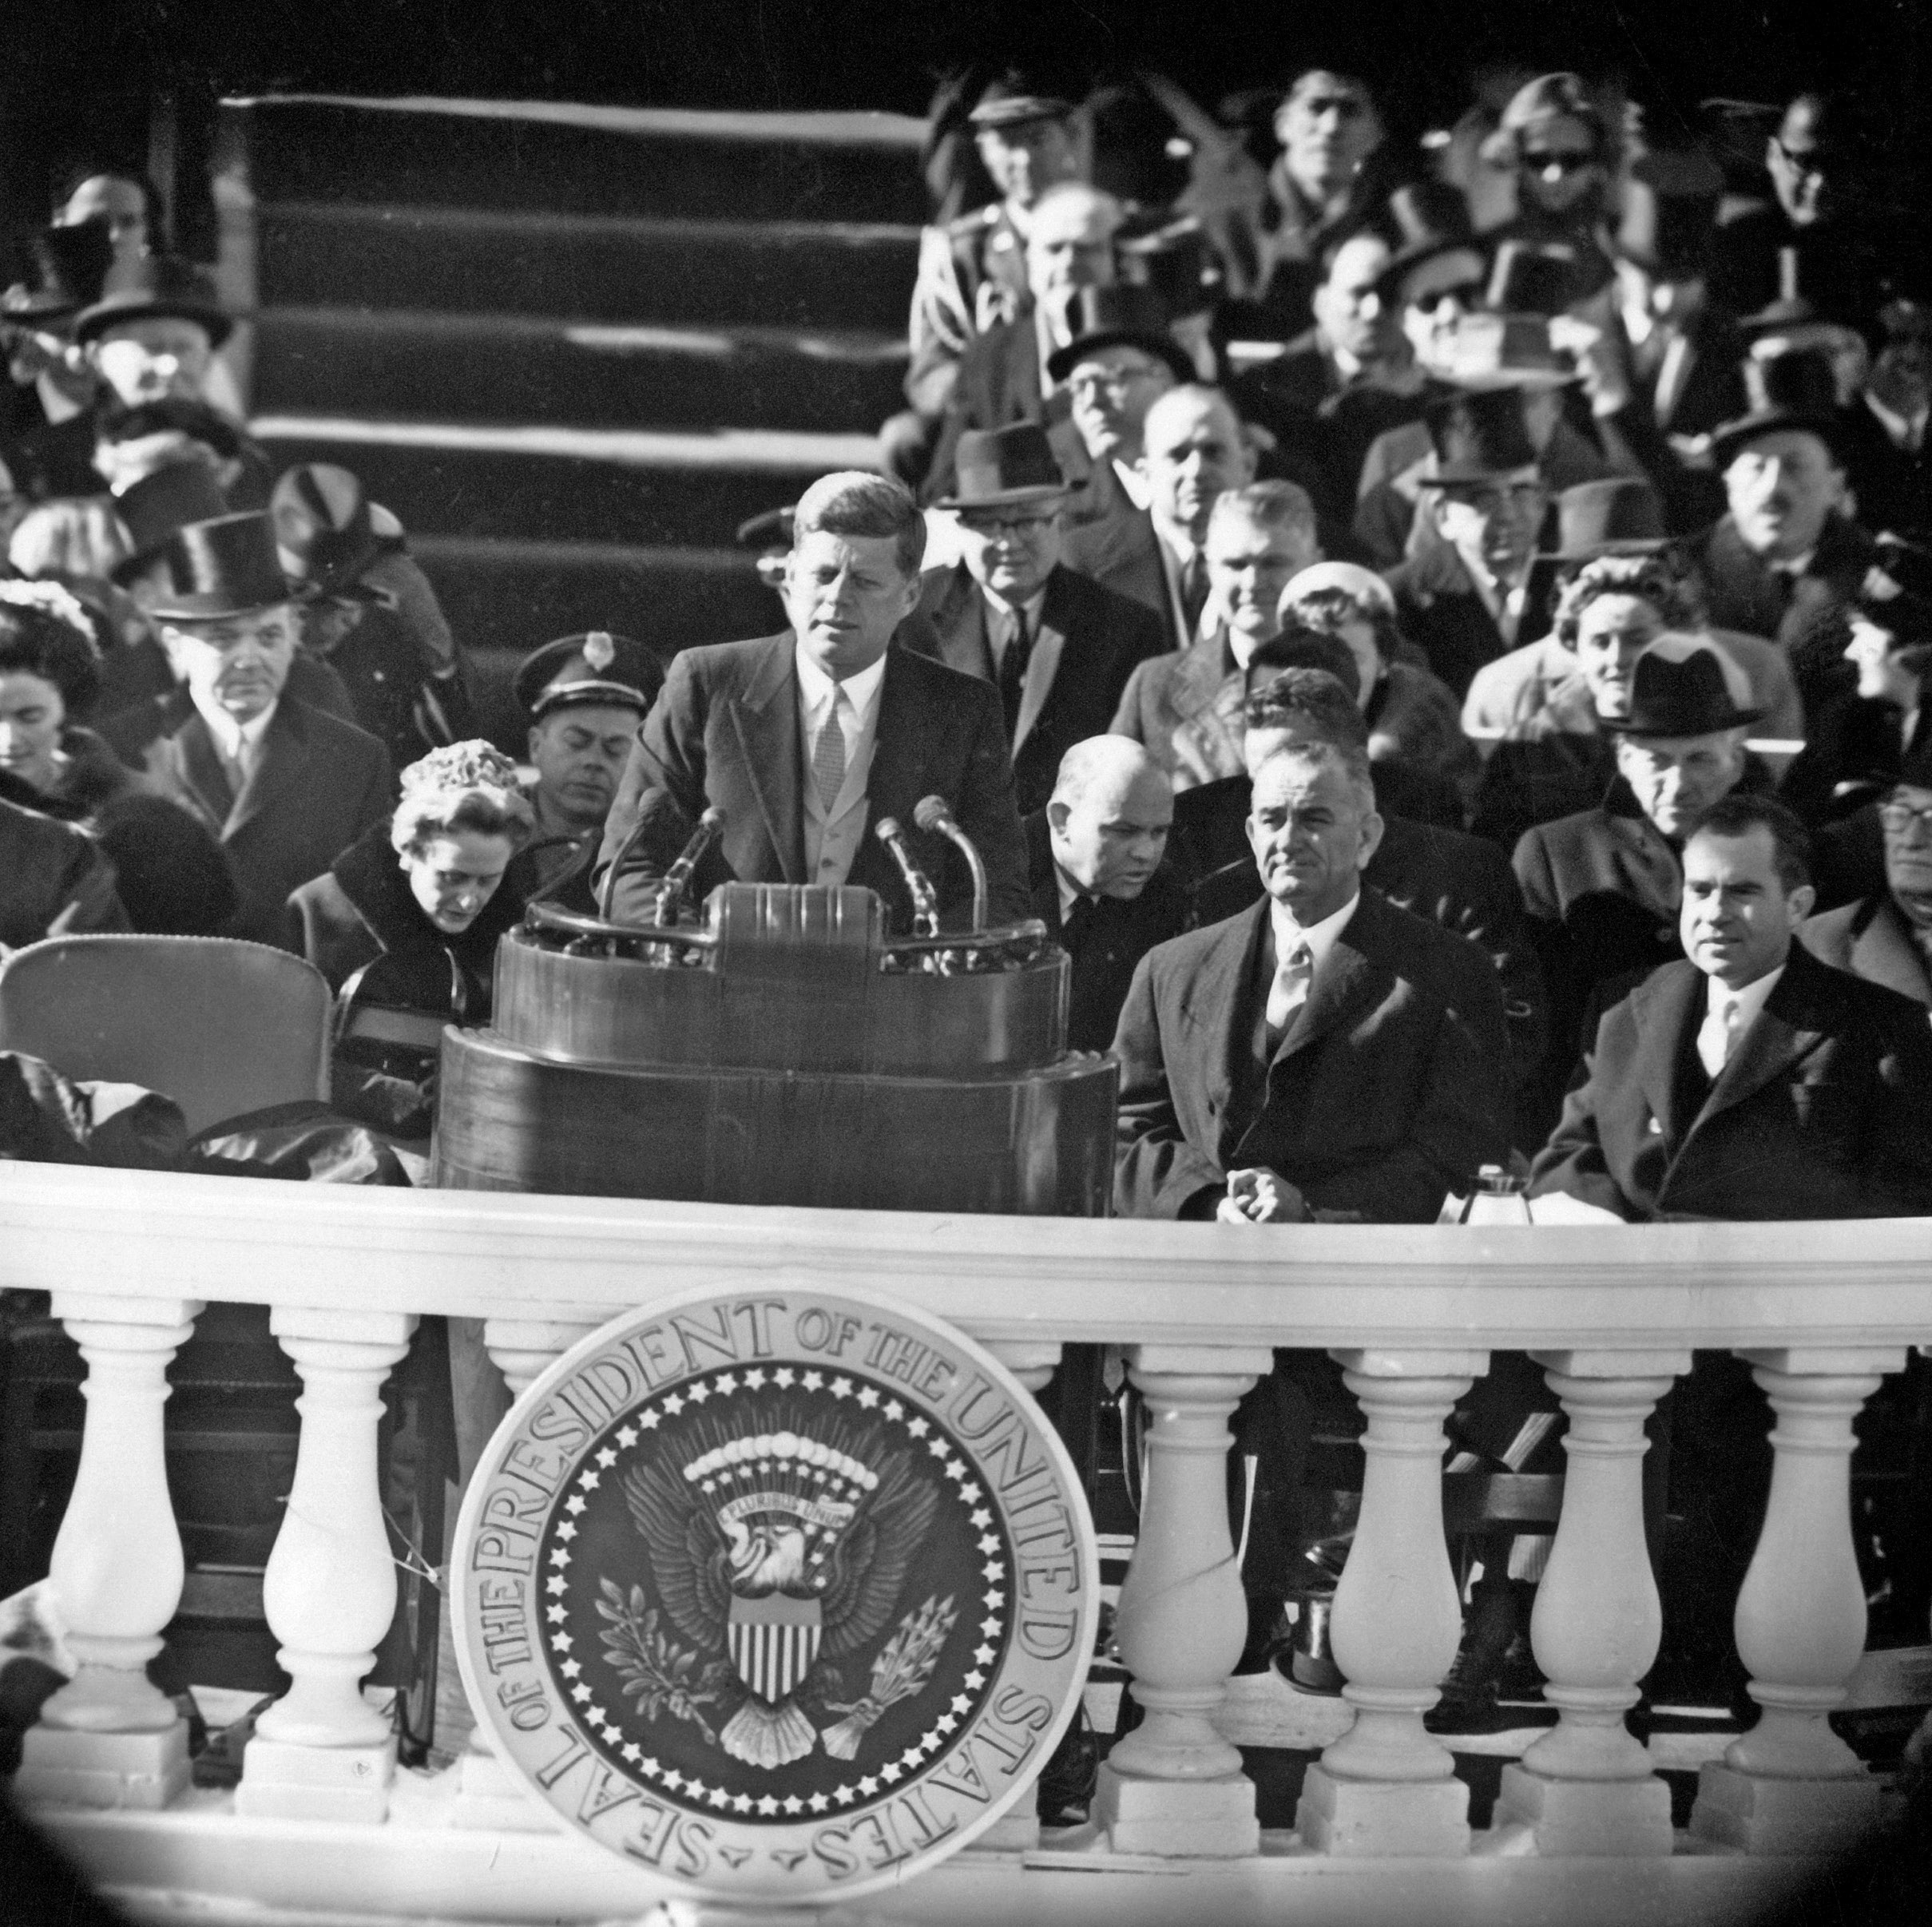 PHOTO: John F. Kennedy delivers his inauguration address, Jan. 20, 1961. Seated behind him are Lyndon B. Johnson and Richard Nixon, the man he defeated.
